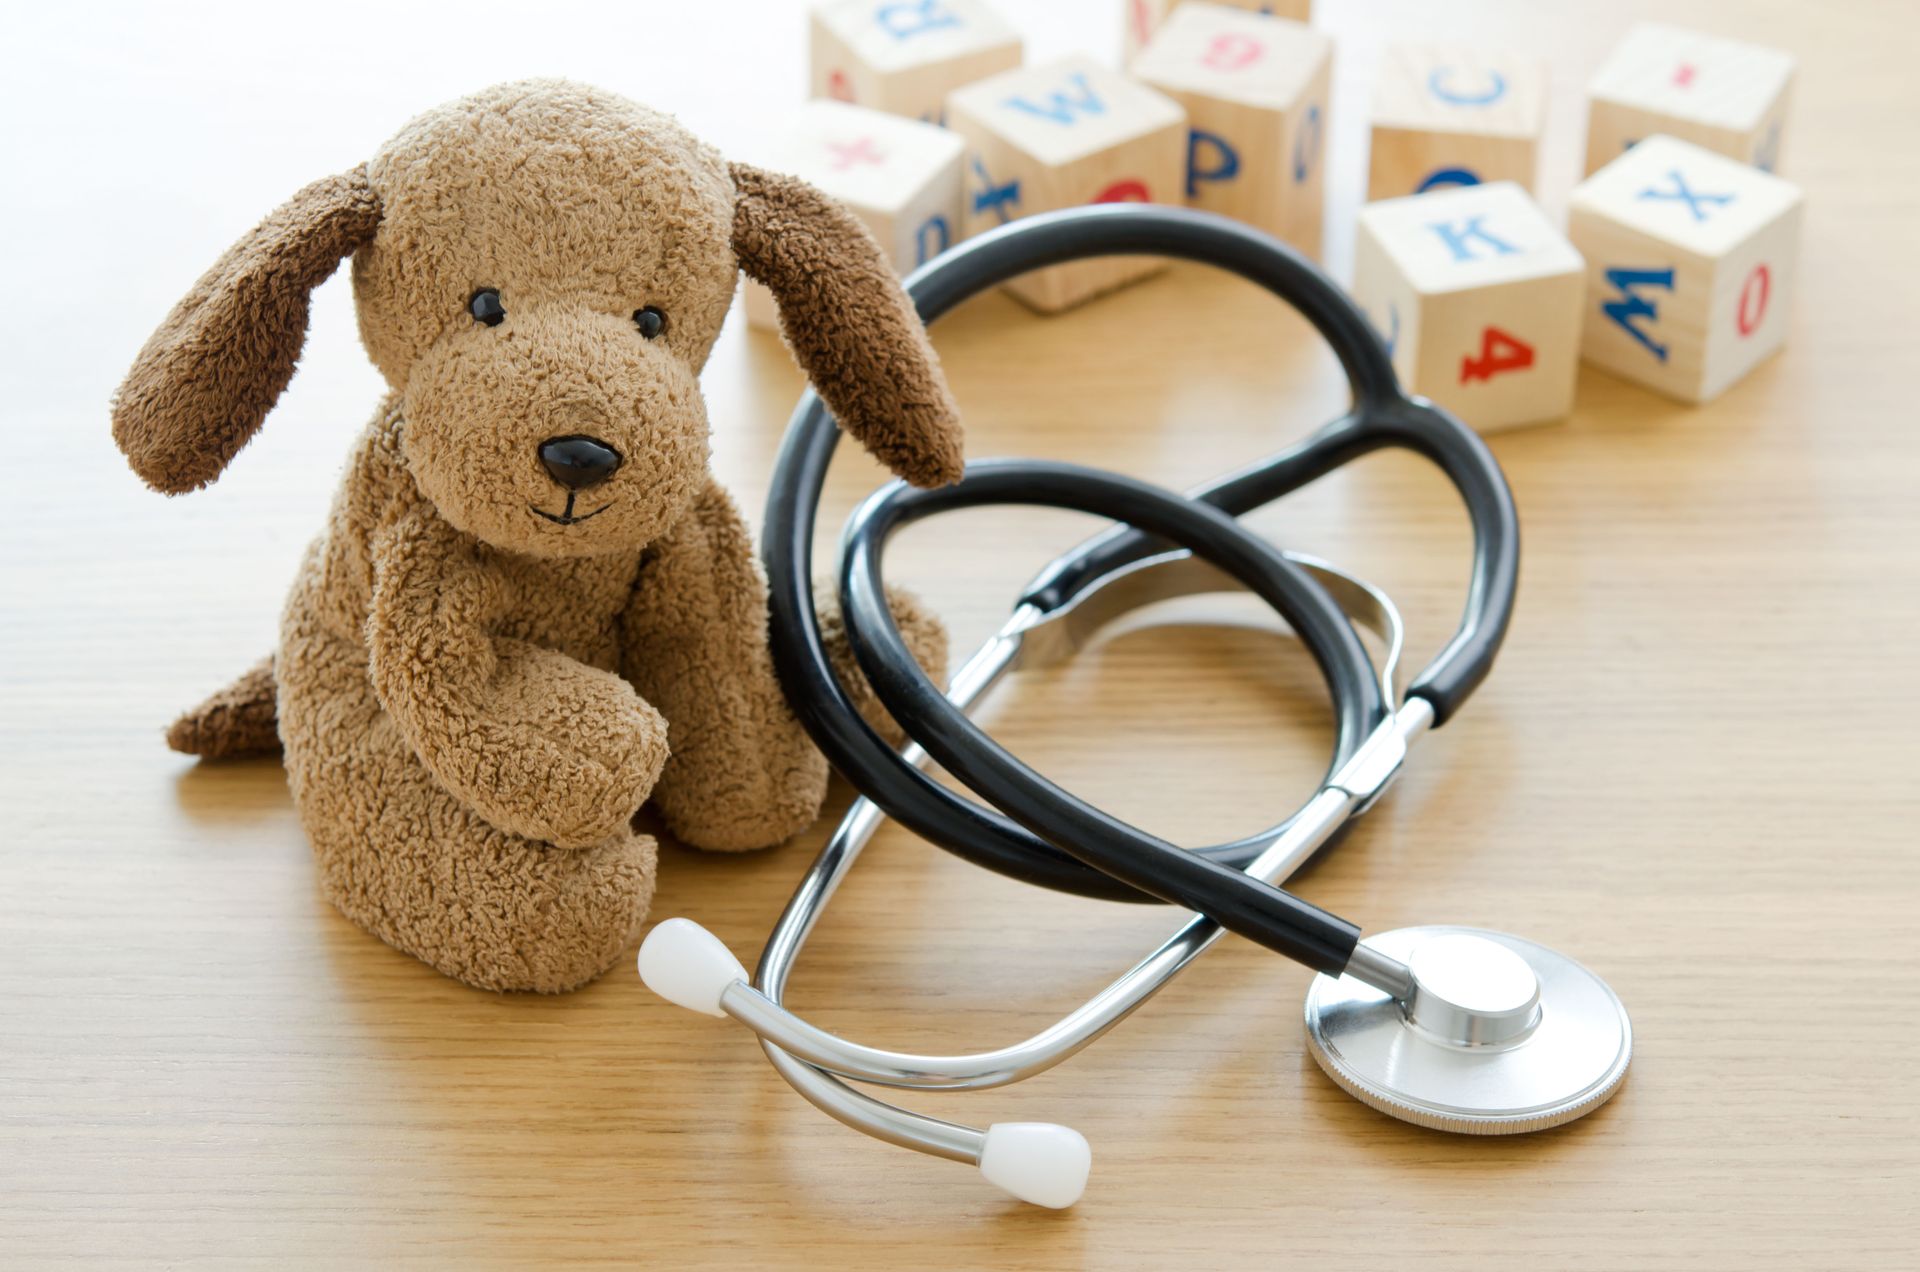 A stuffed dog sitting next to a stethoscope on a table